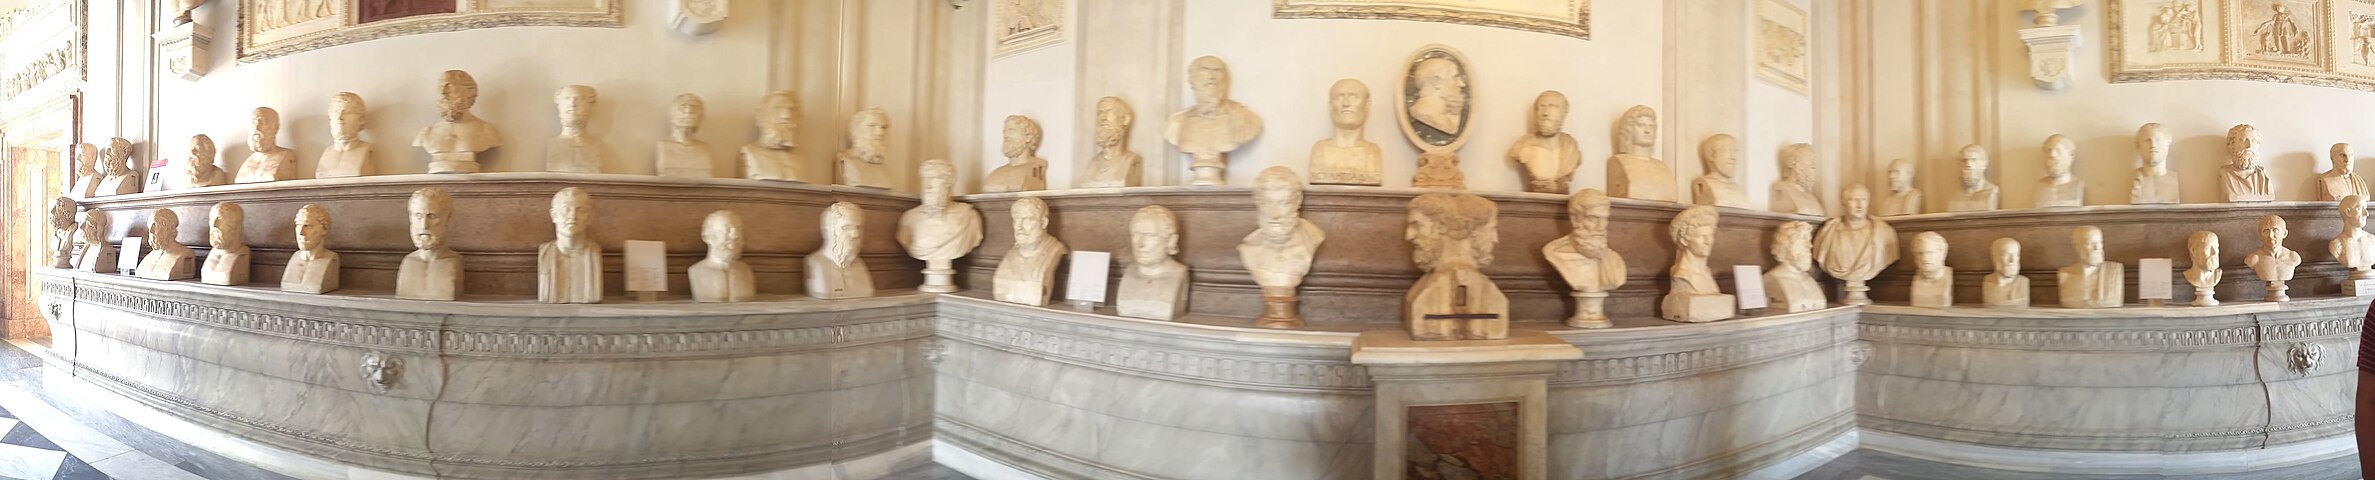 Panorama of busts displayed at Capitoline museum, Rome